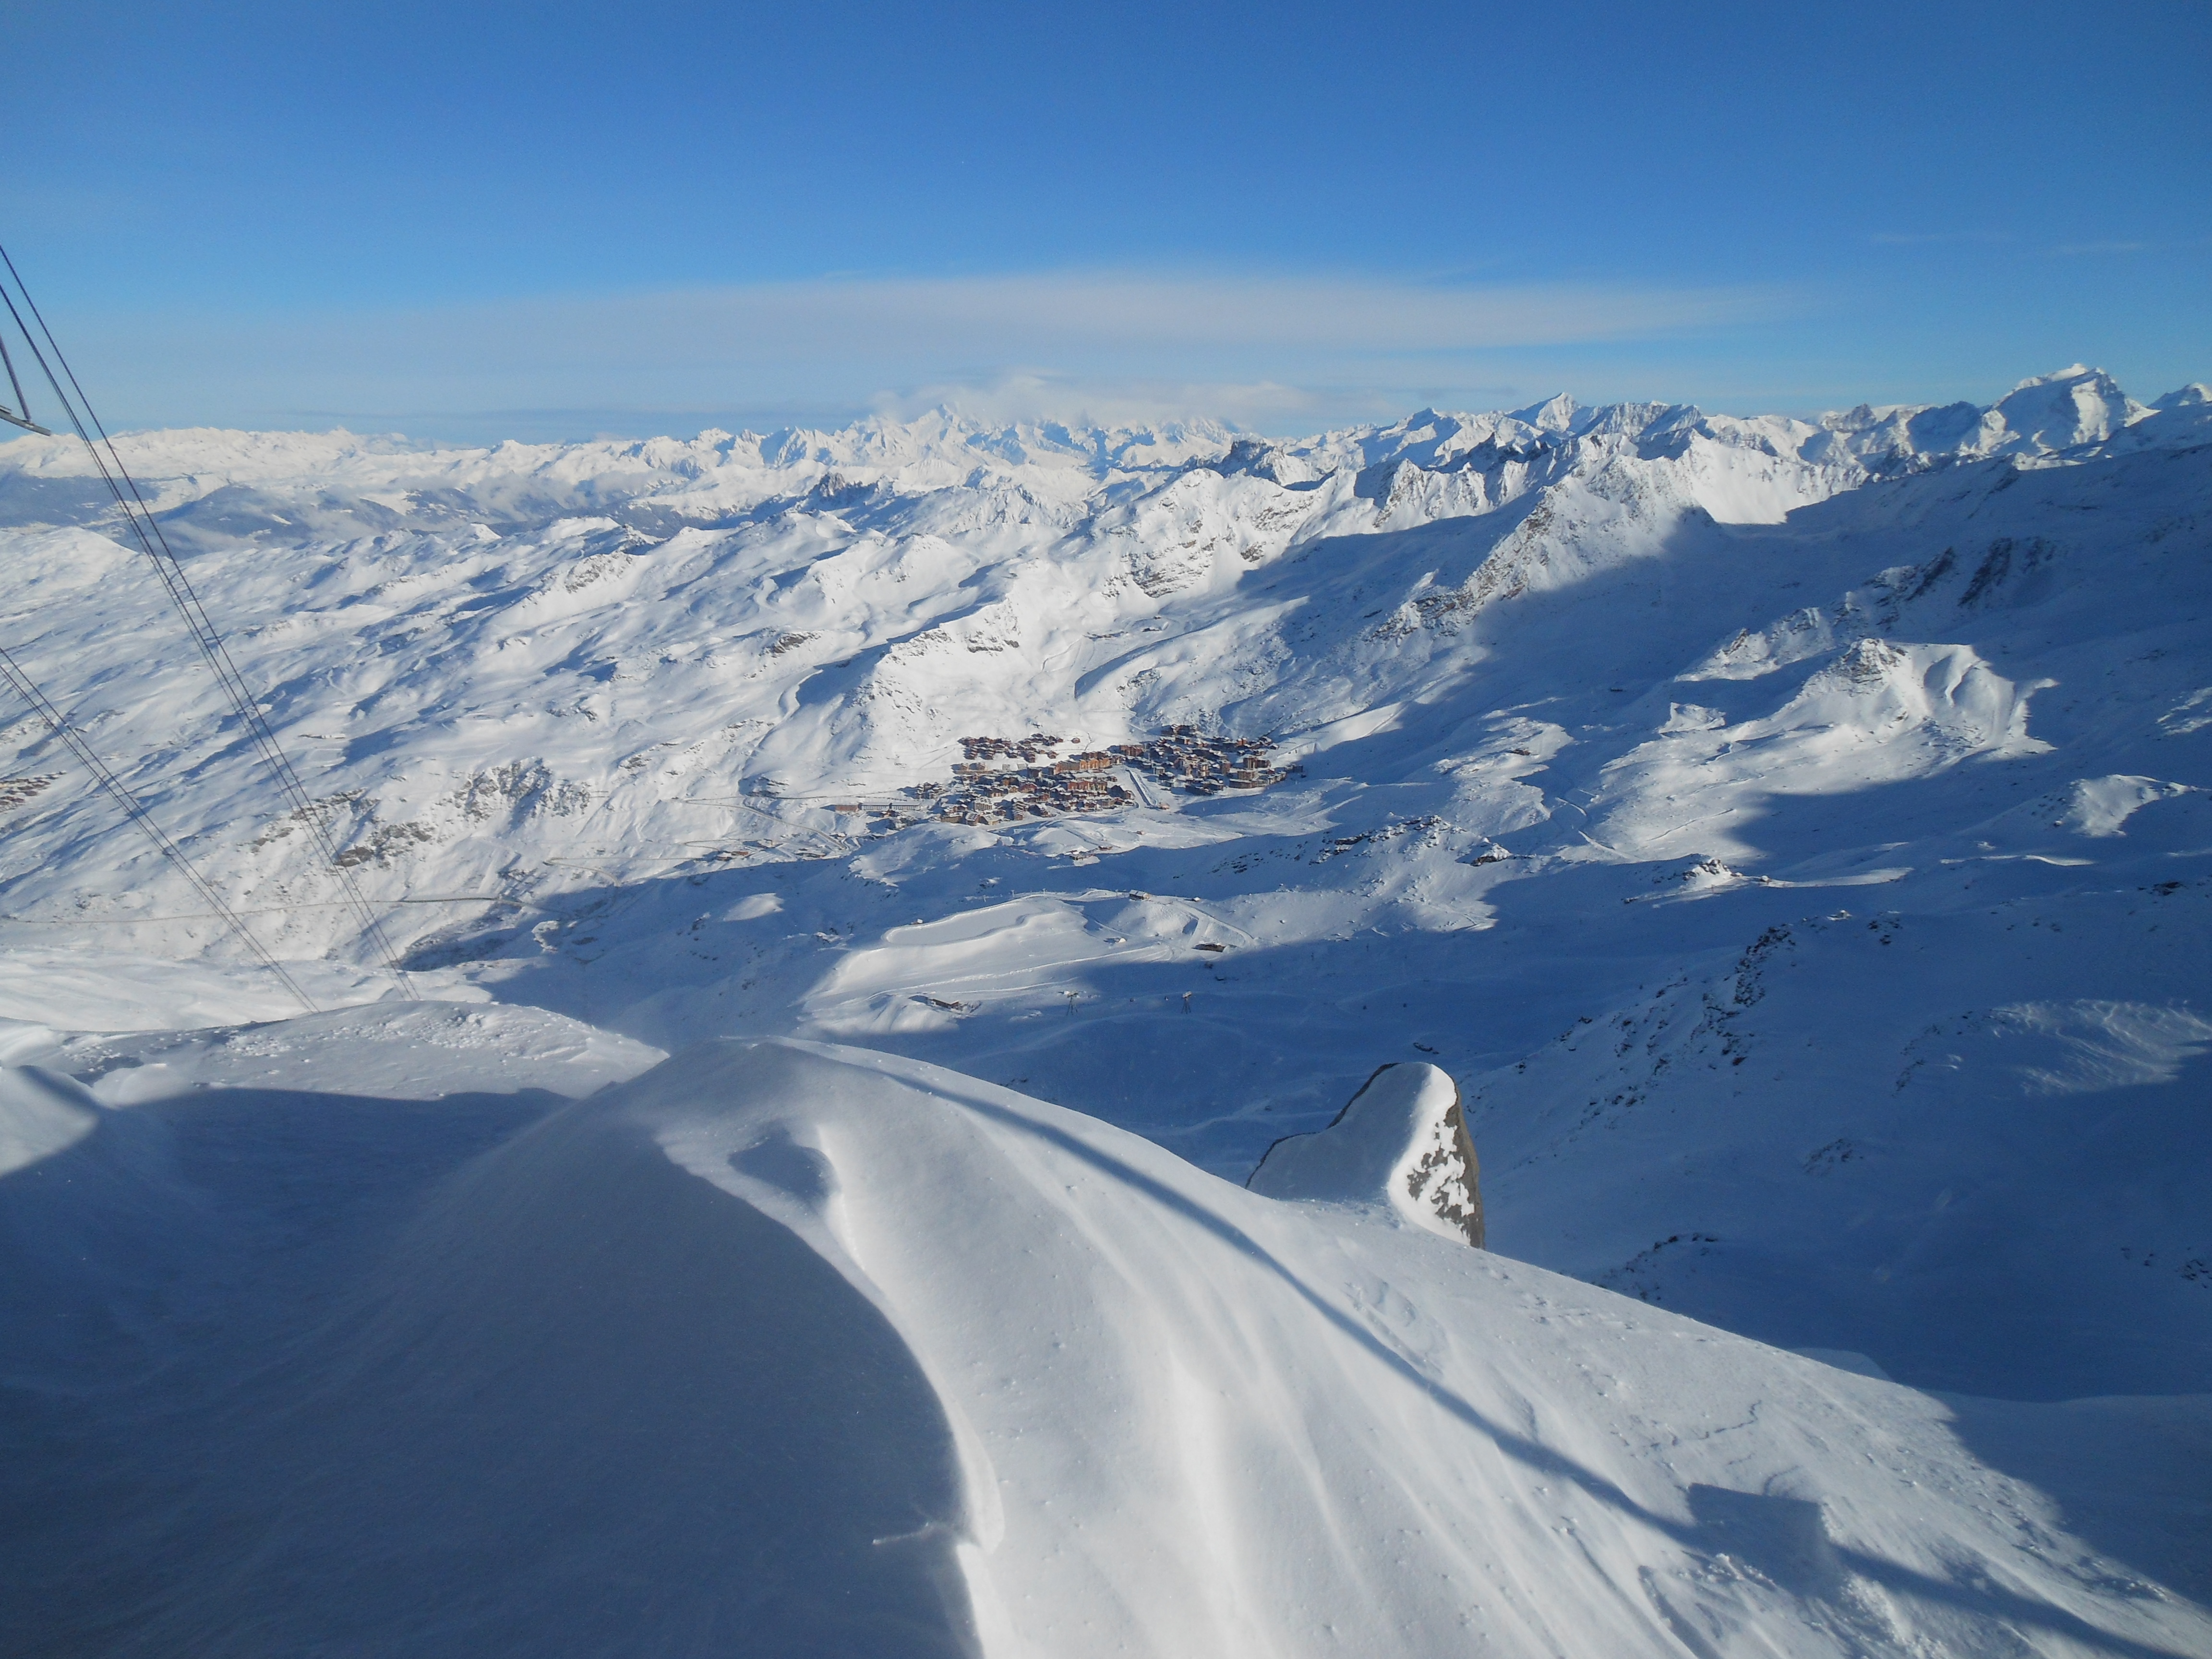 Valley, Val Thorens